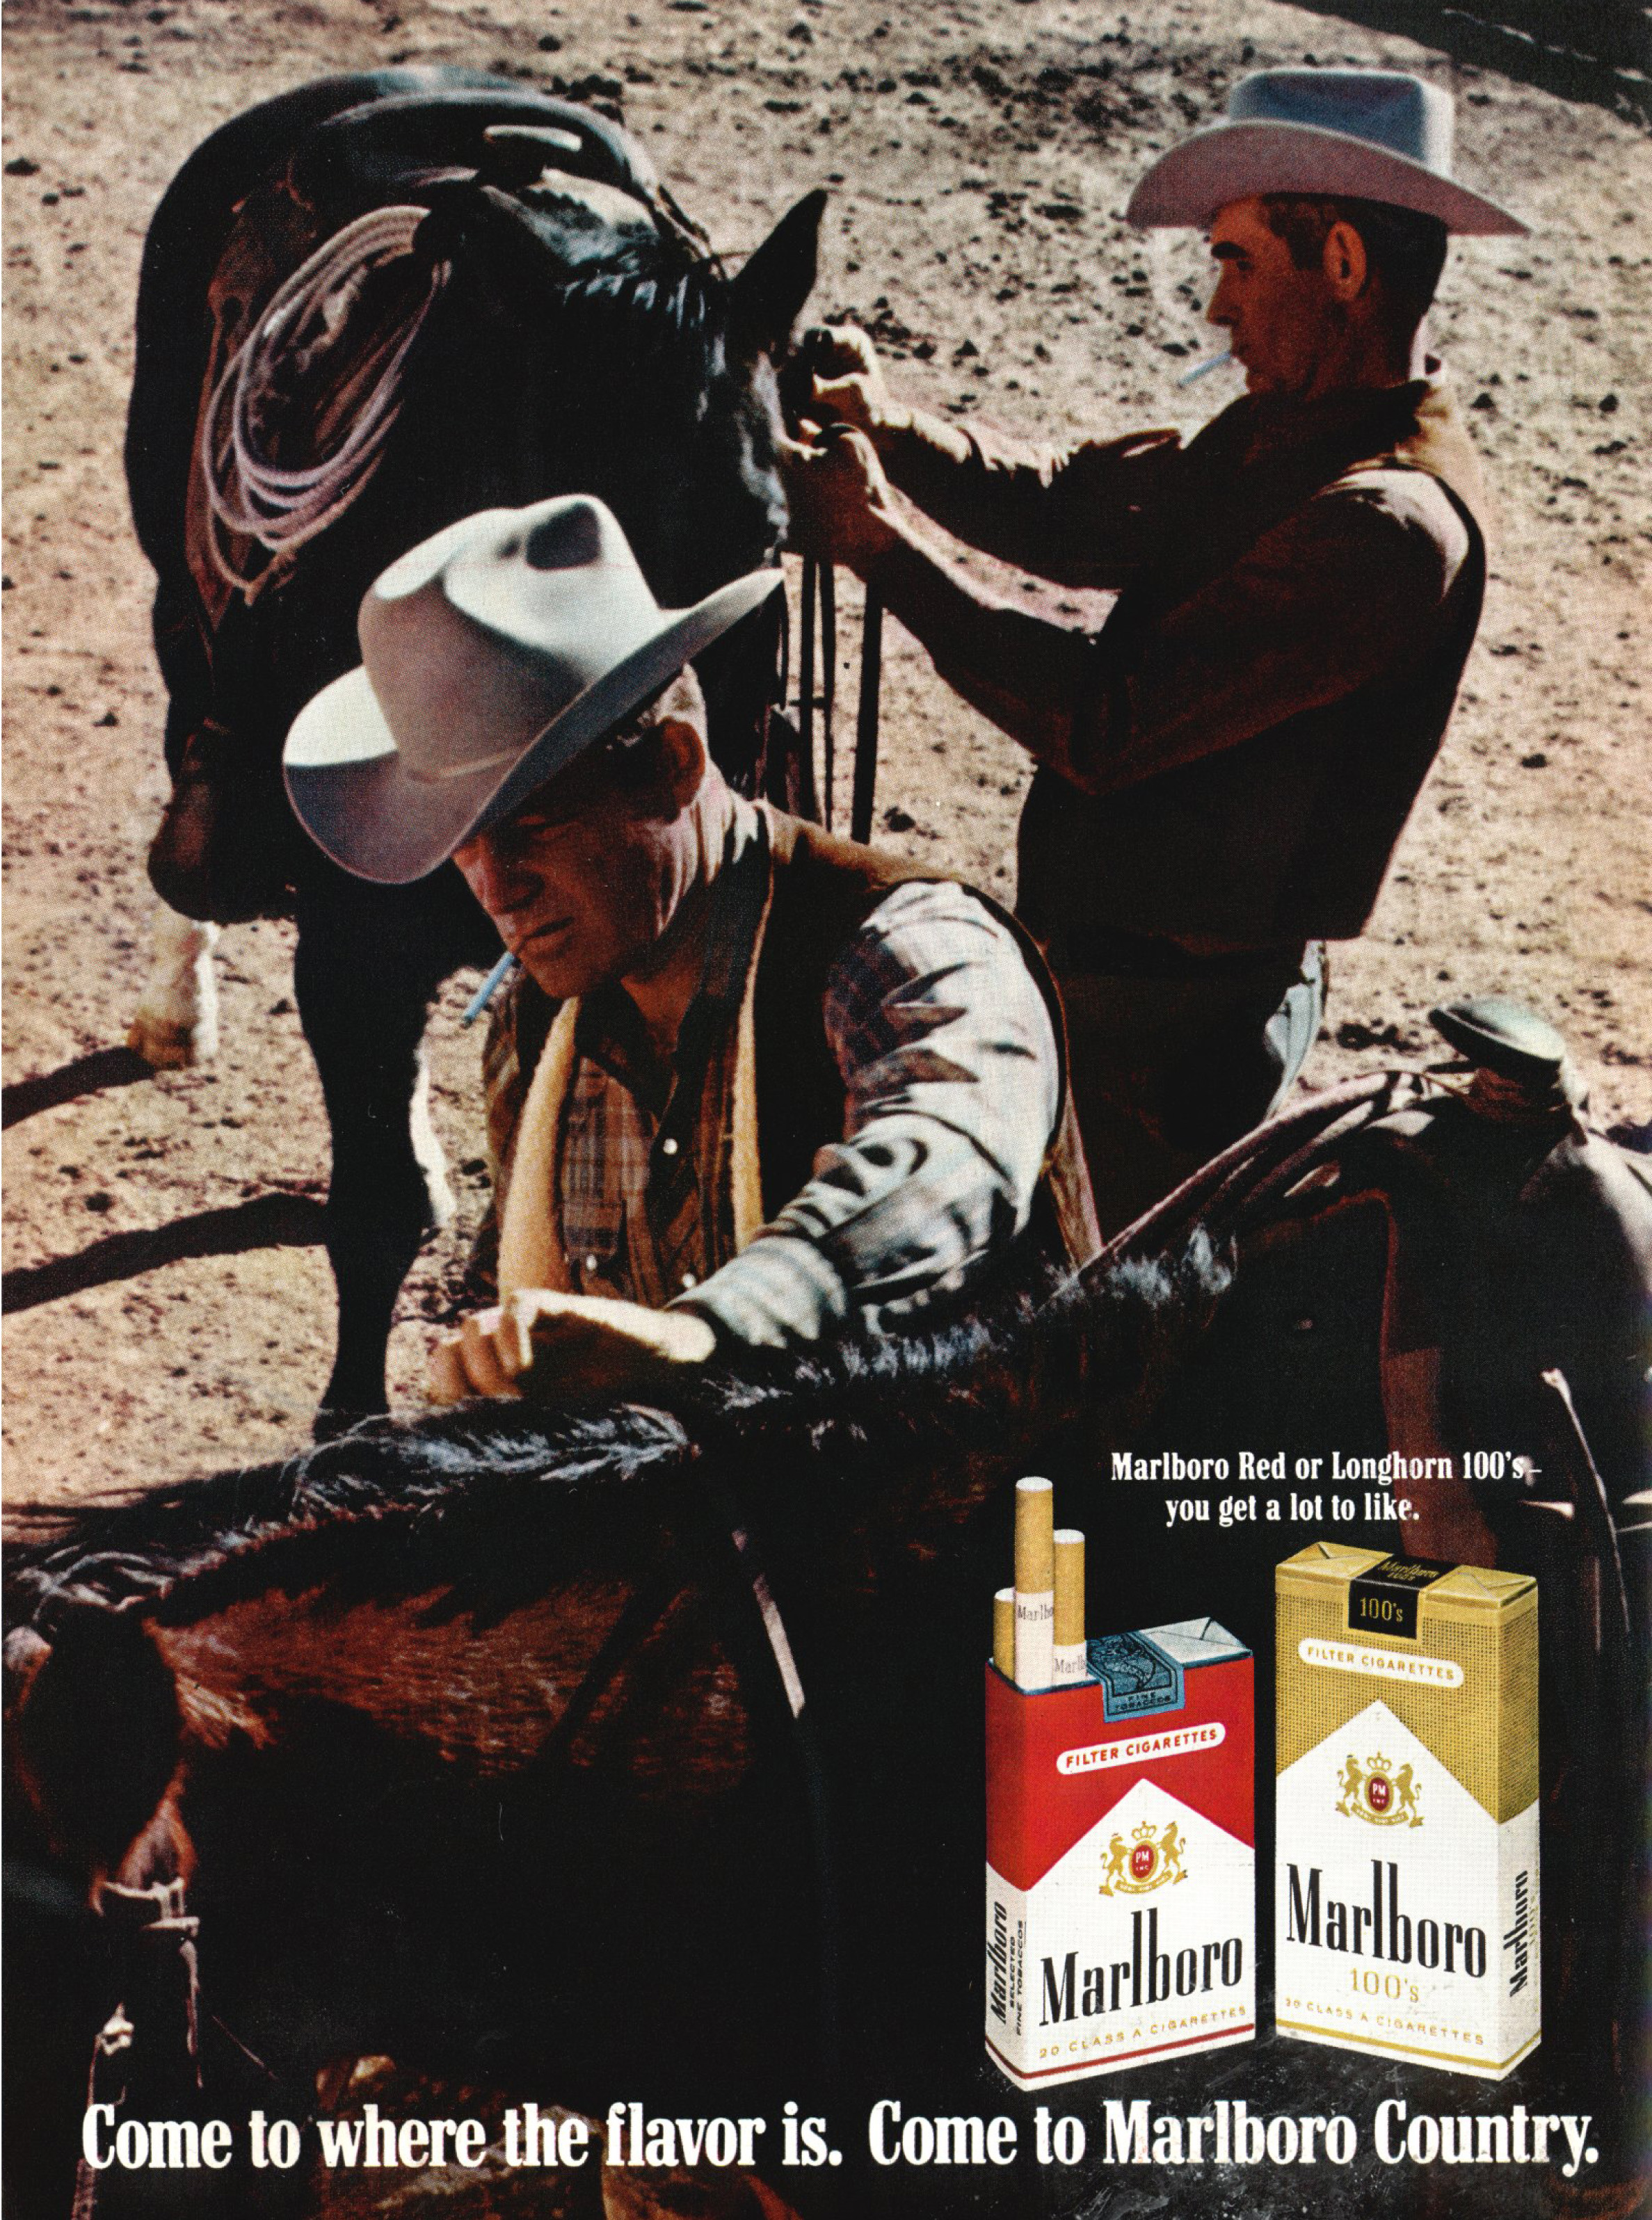 Marlboro's advertisement in the July 25, 1969 edition of Time Magazine.